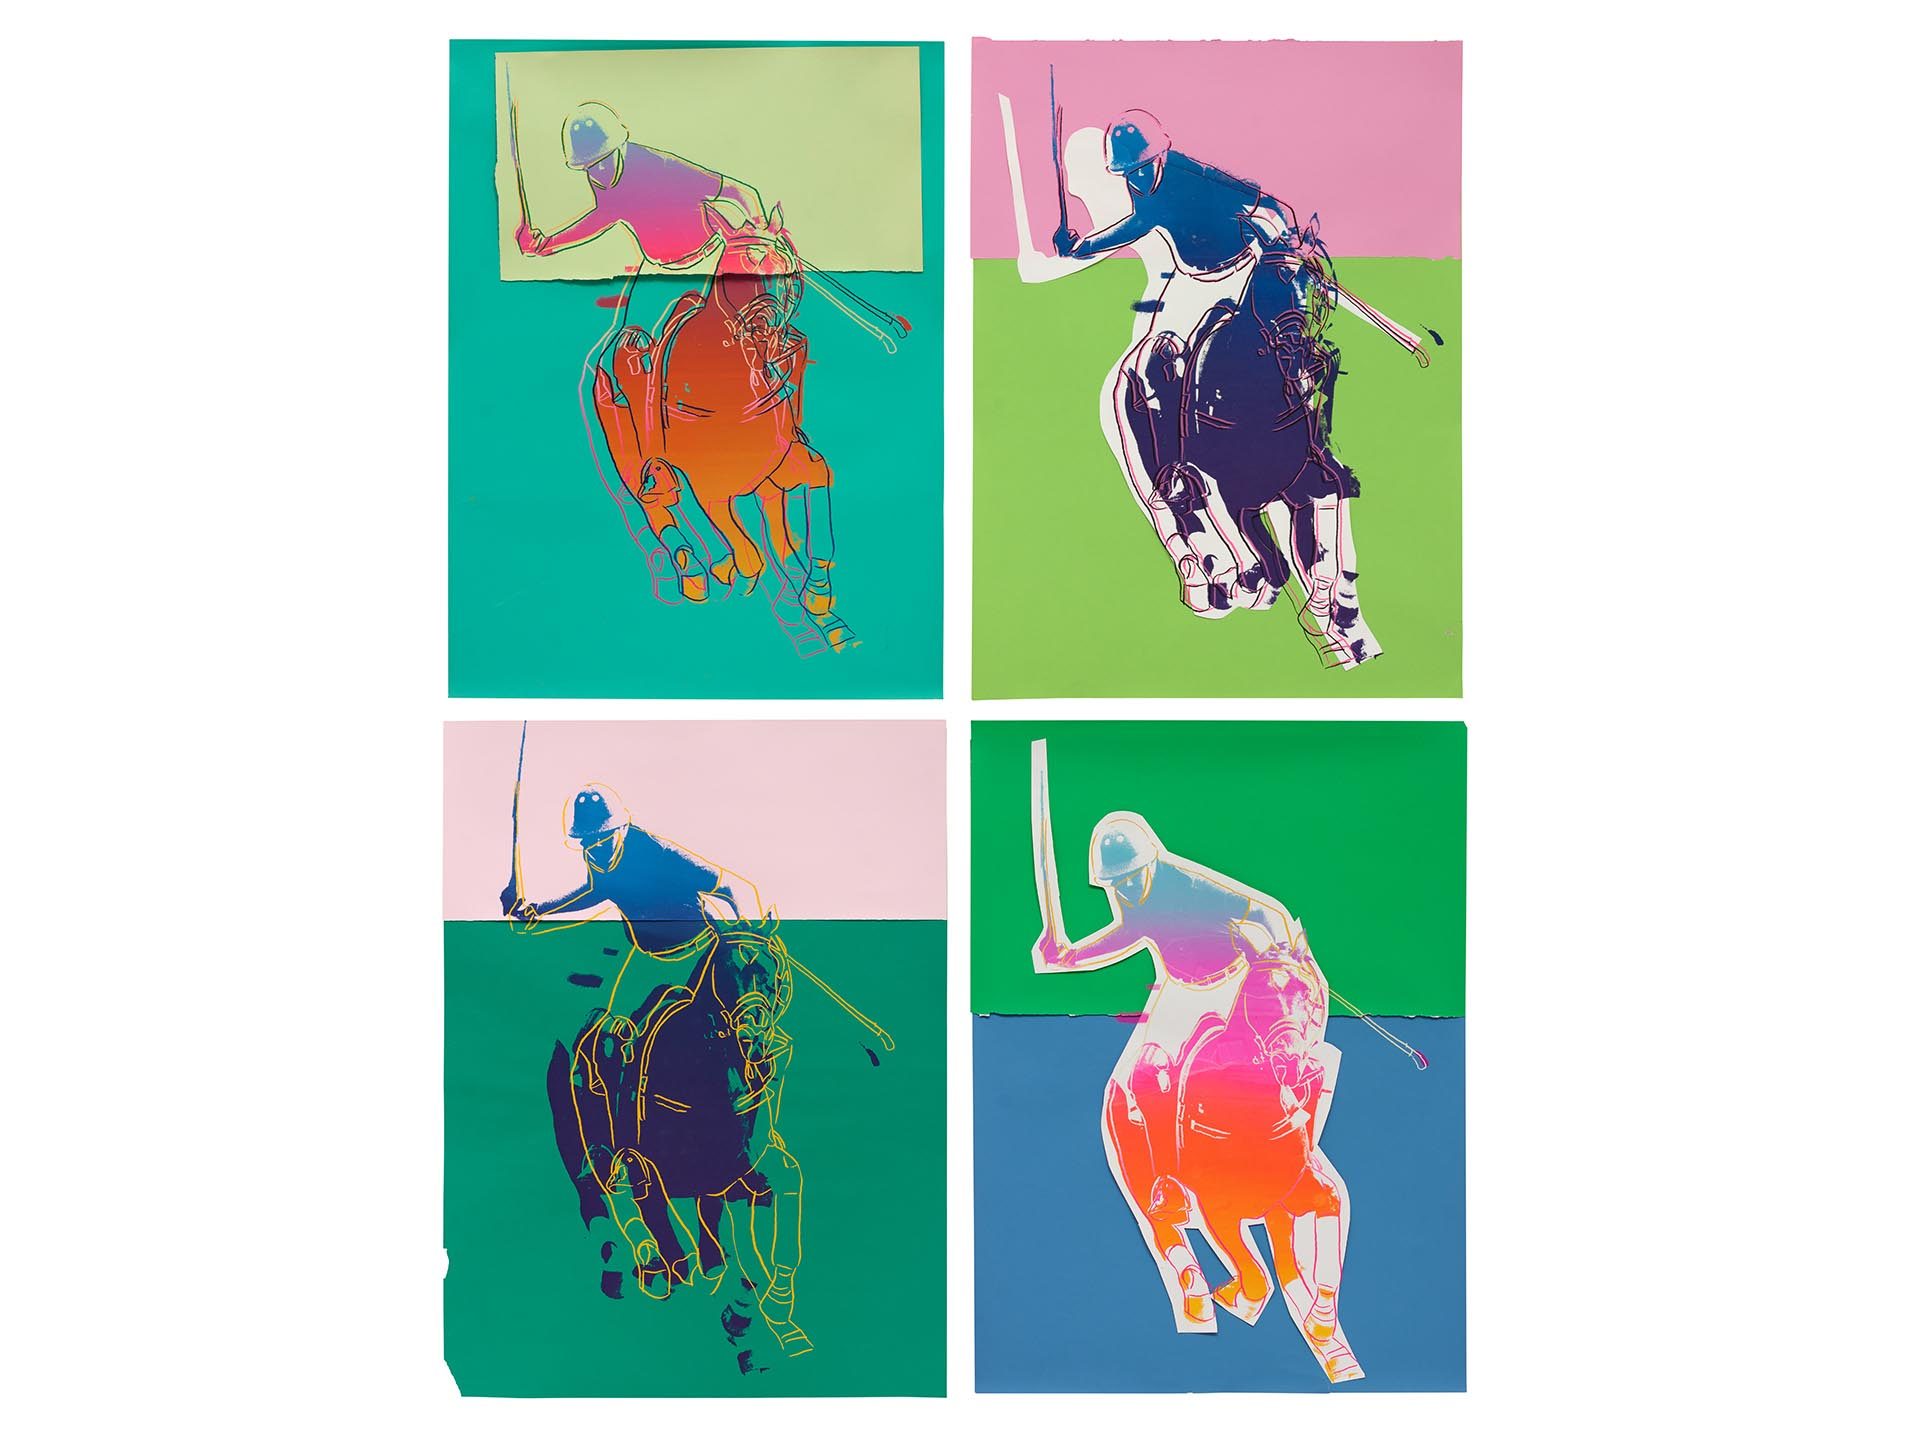 Four Polo Players, 1985. Andy Warhol (American, 1928-1987